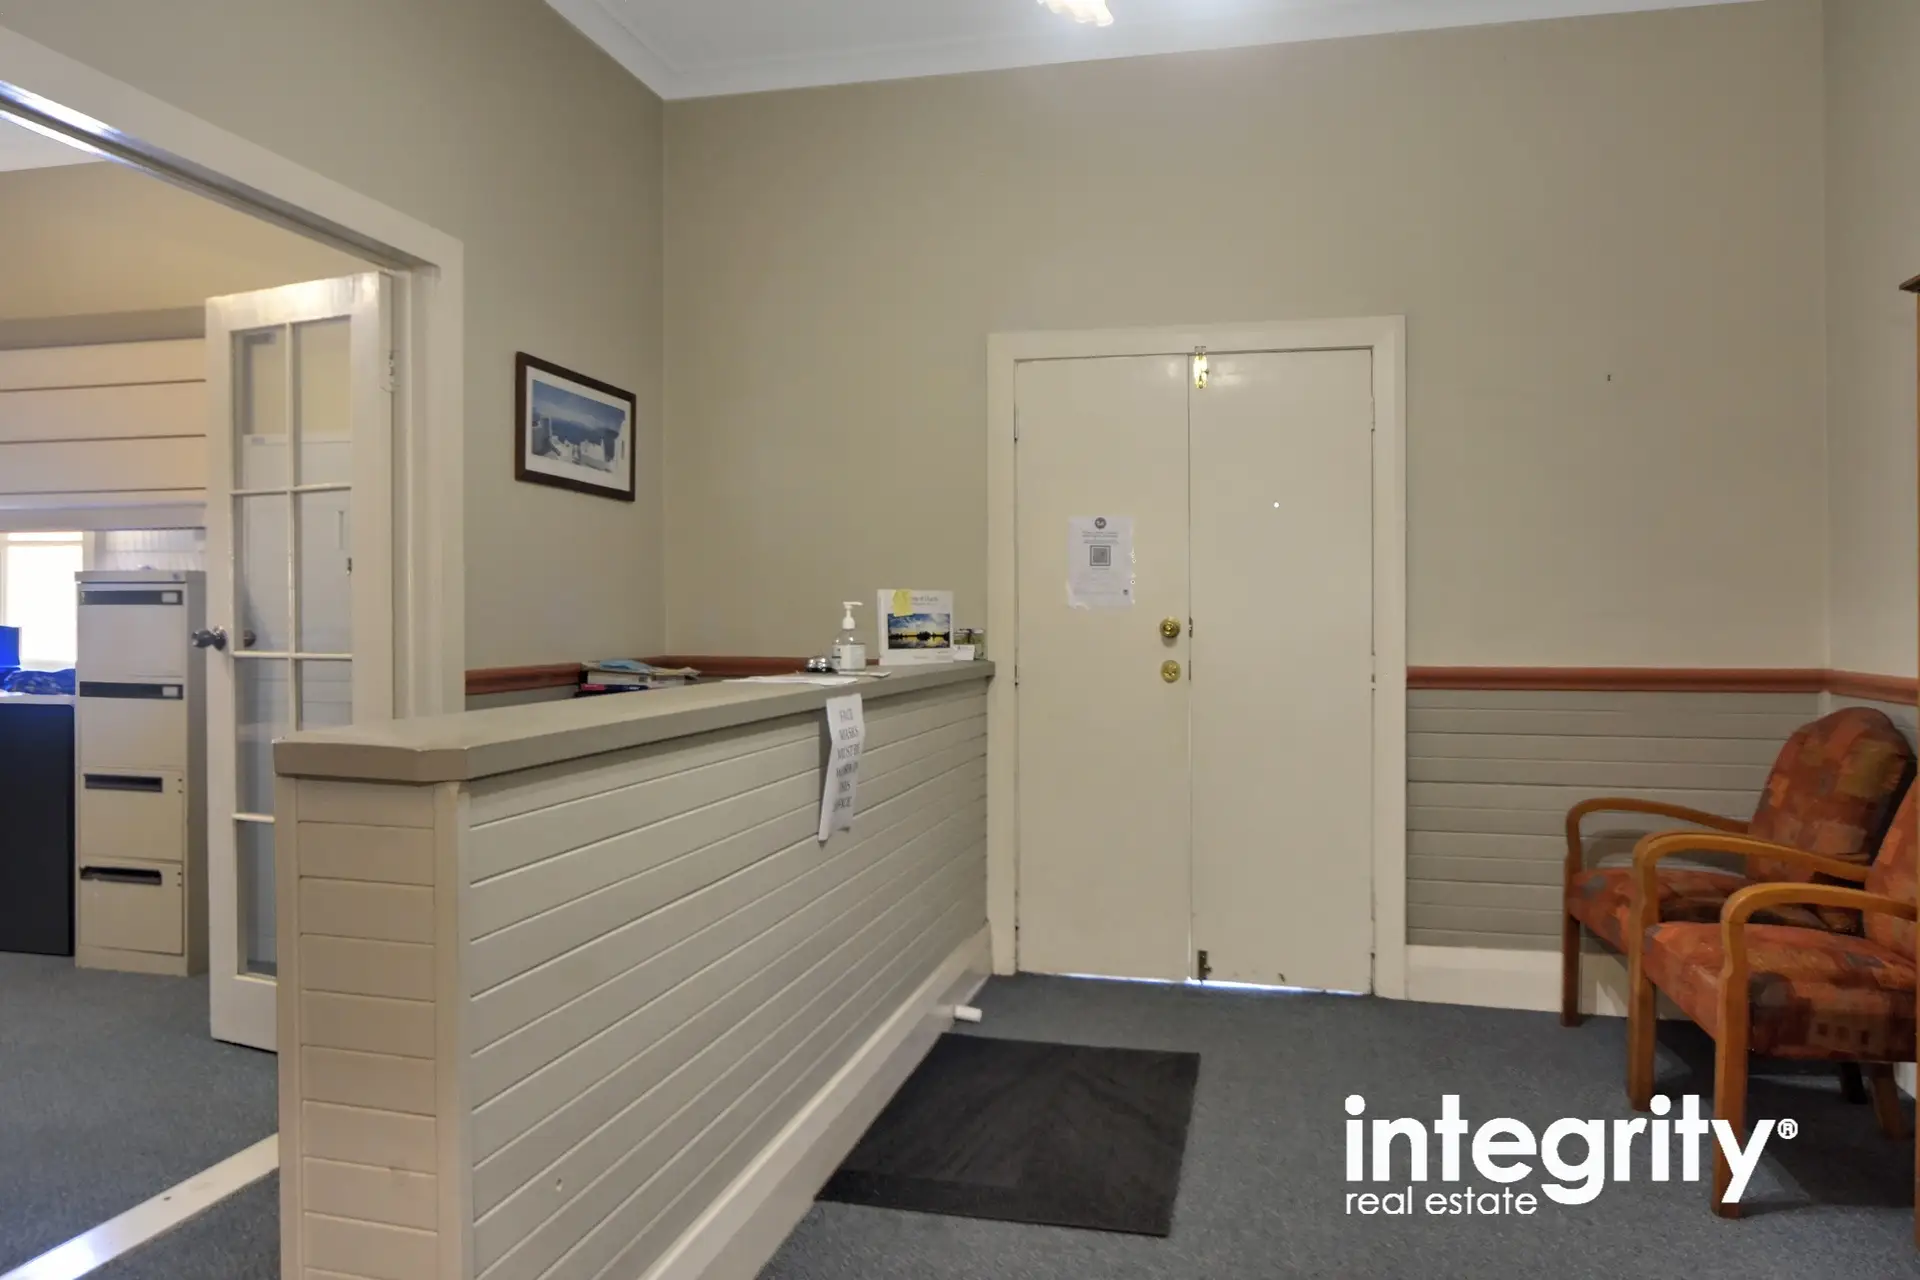 71 Plunkett Street, Nowra For Sale by Integrity Real Estate - image 4